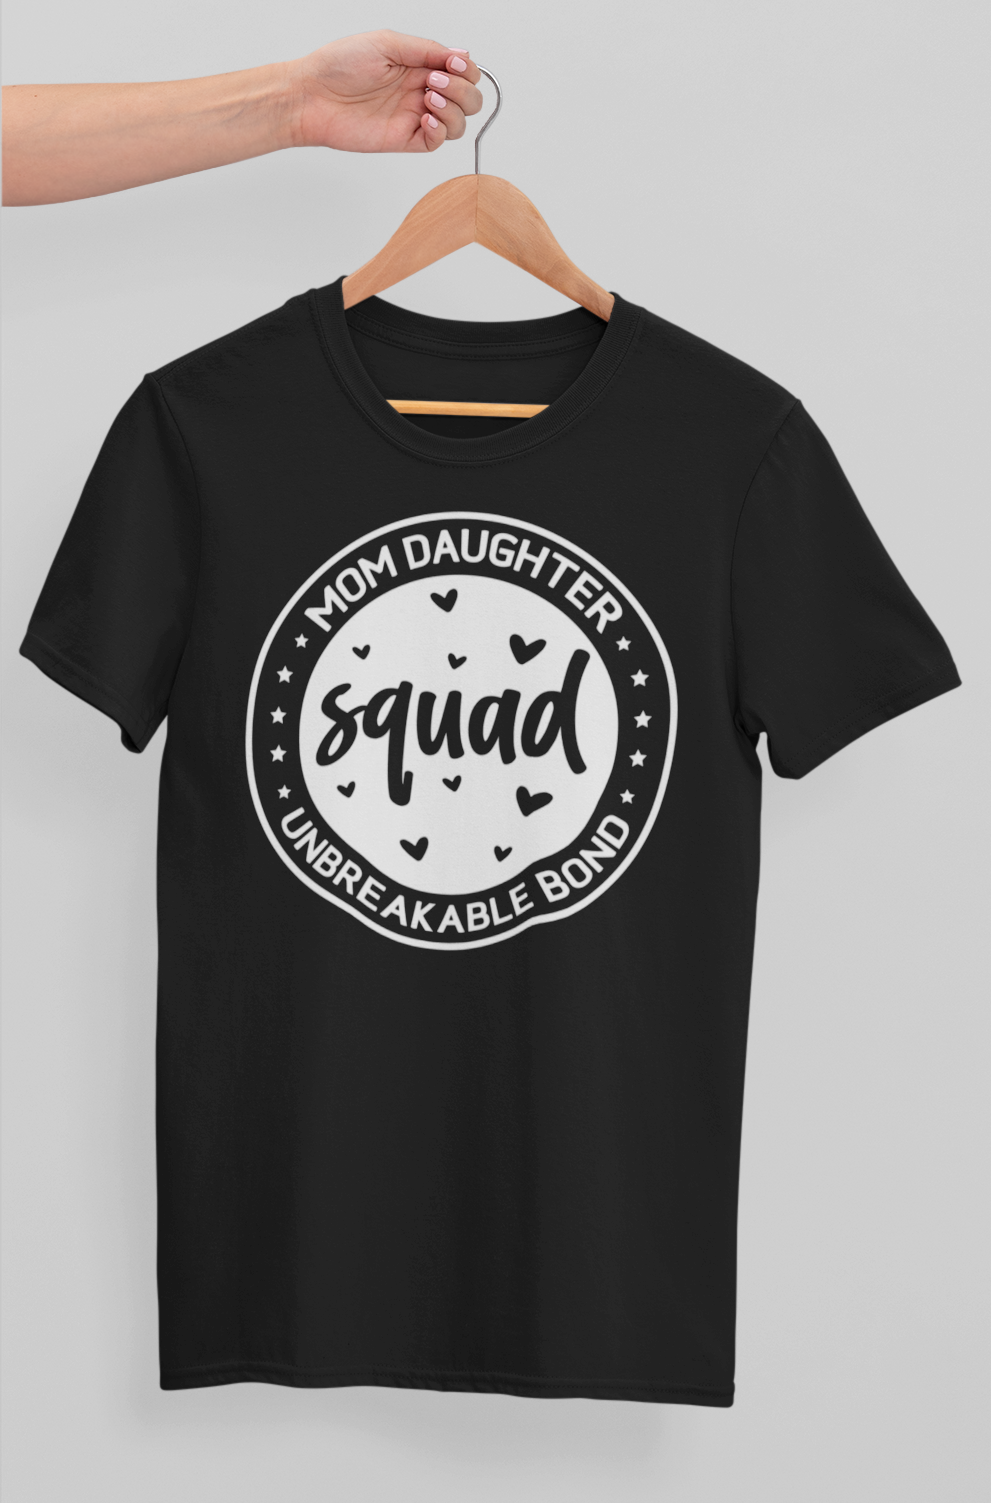 Mom Daughter Squad - Unbreakable Bond T-shirt